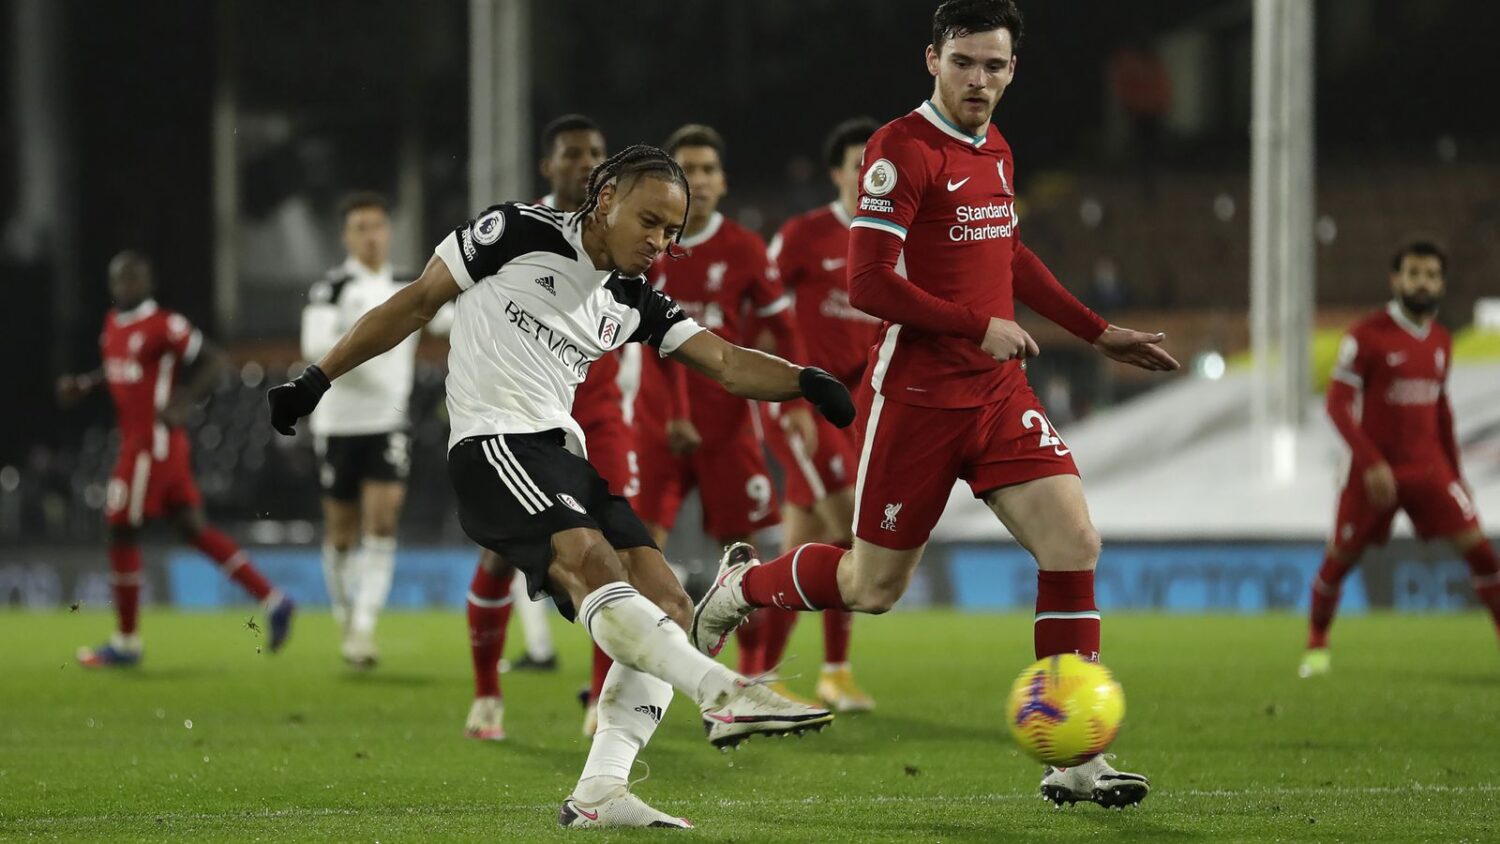 Liverpool Labour To Draw Against Fulham